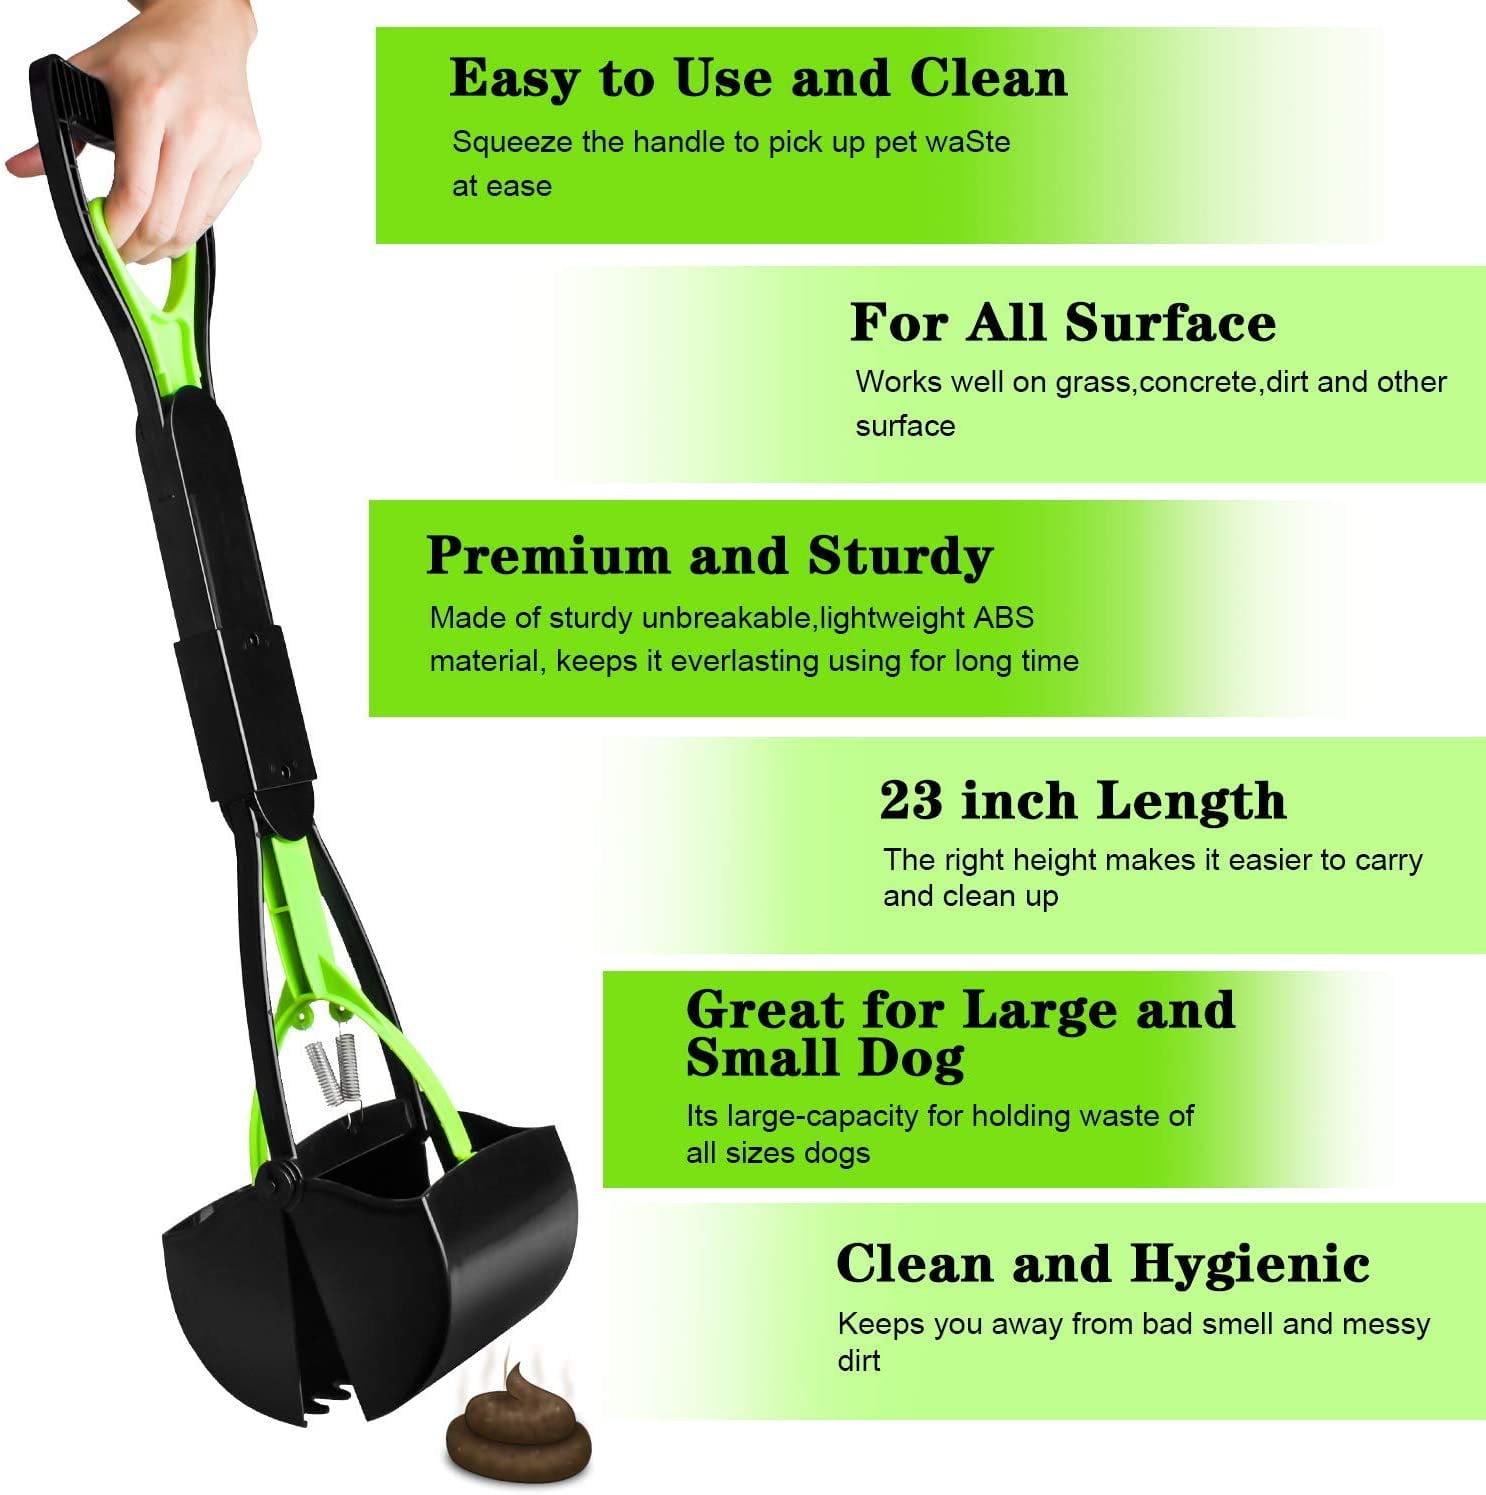 Gravel Dirt Grass TIMINGILA 33 Long Handle Portable Pet Pooper Scooper for Large and Small Dogs,High Strength Material and Durable Spring,Great for Lawns 